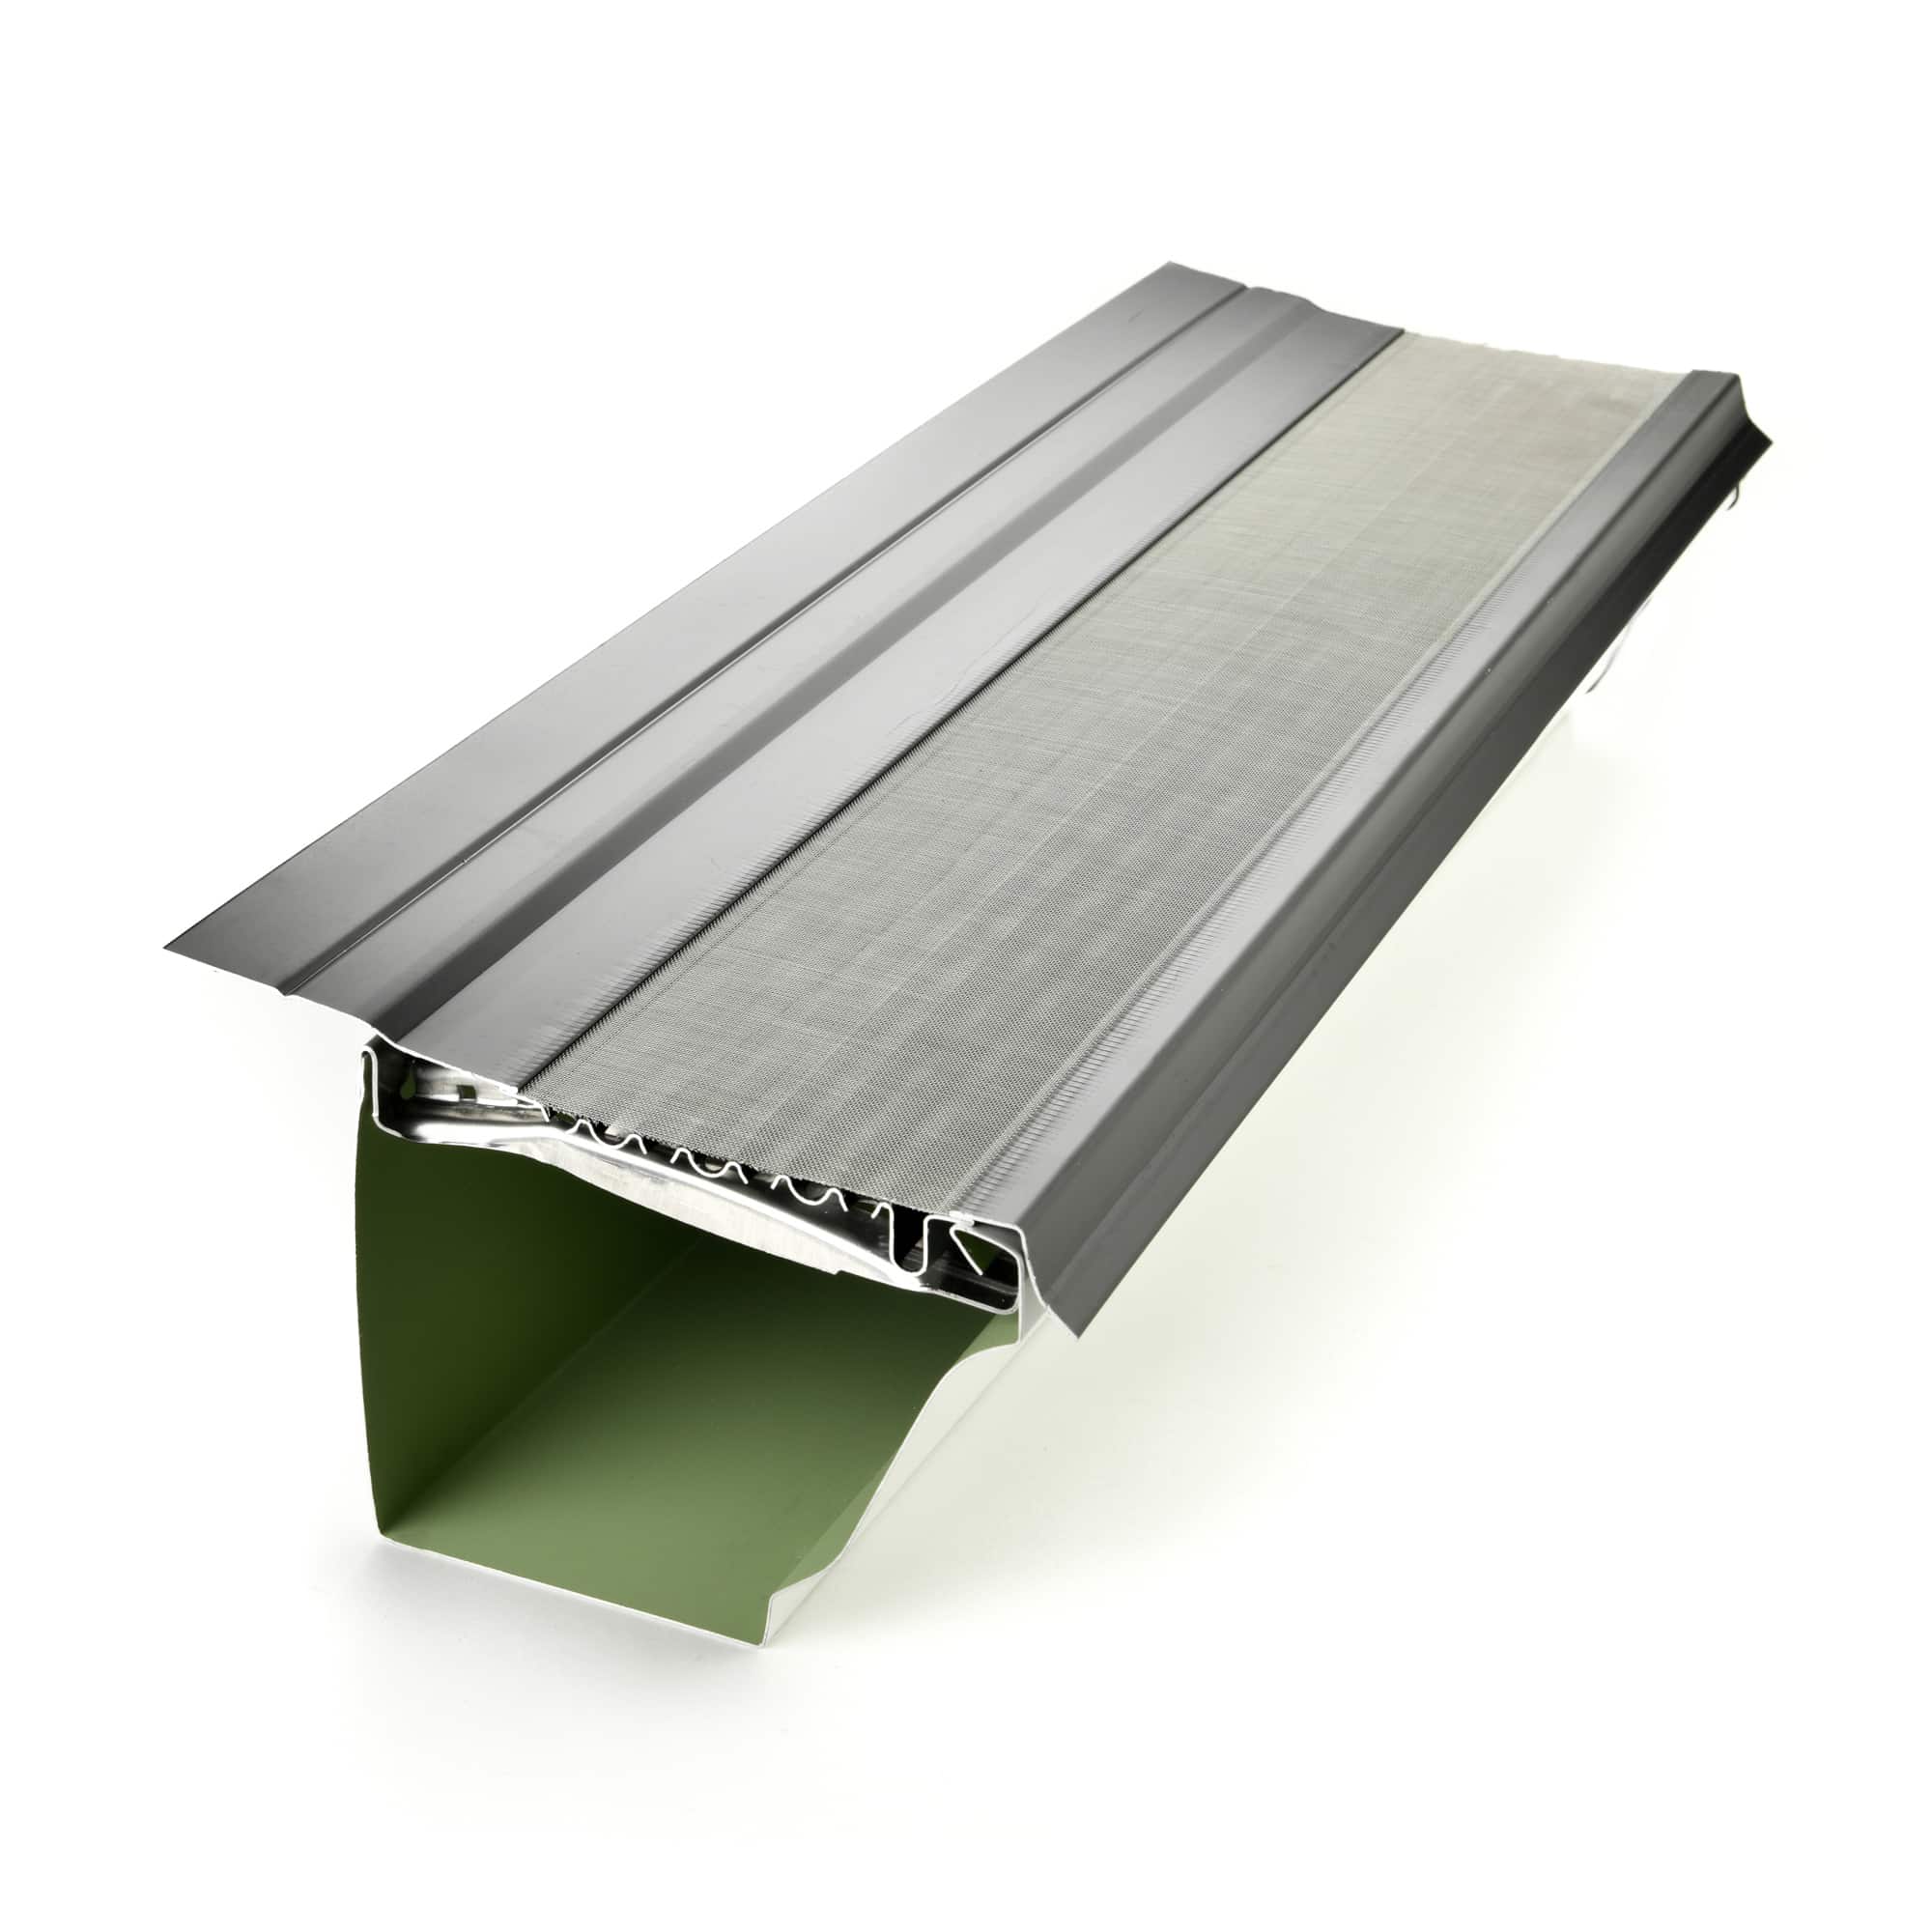 5 and 6 inch micromesh gutter protection,are gutters required by code